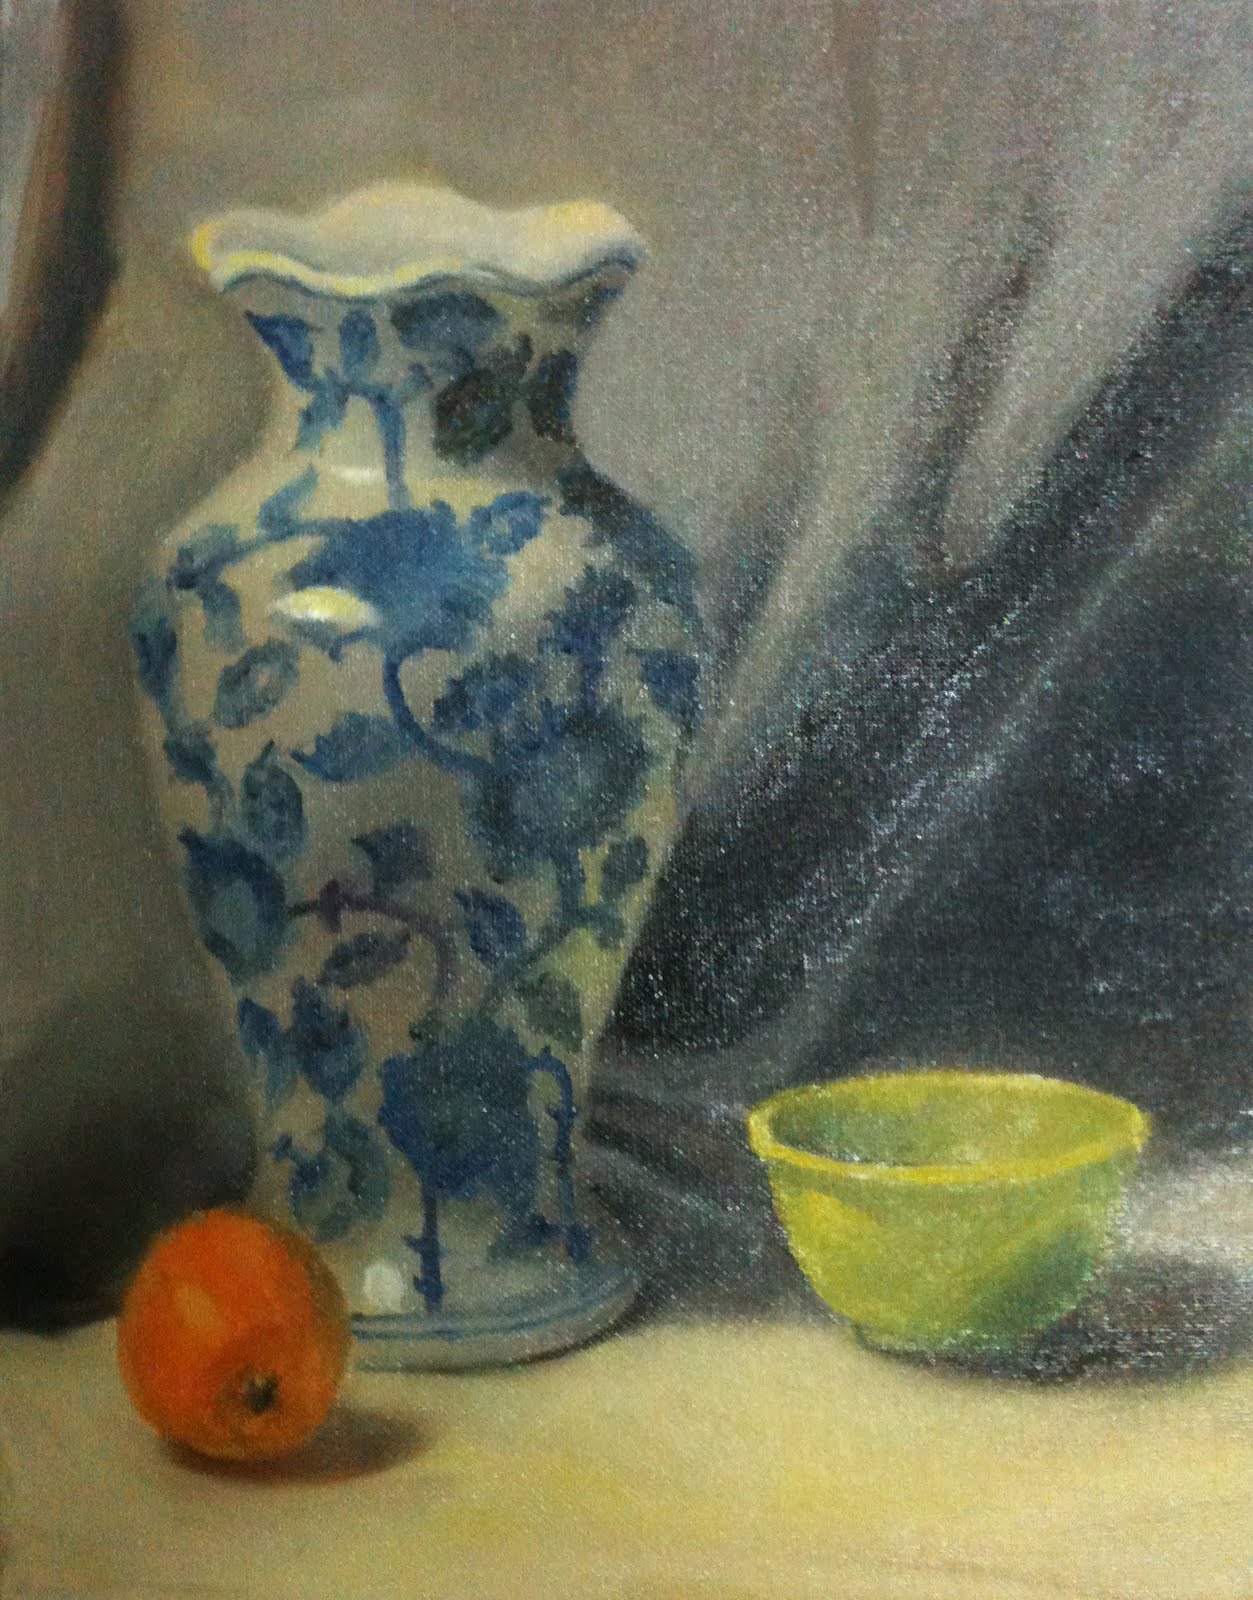 Fleeting Memories still life painting 7 patterned objects